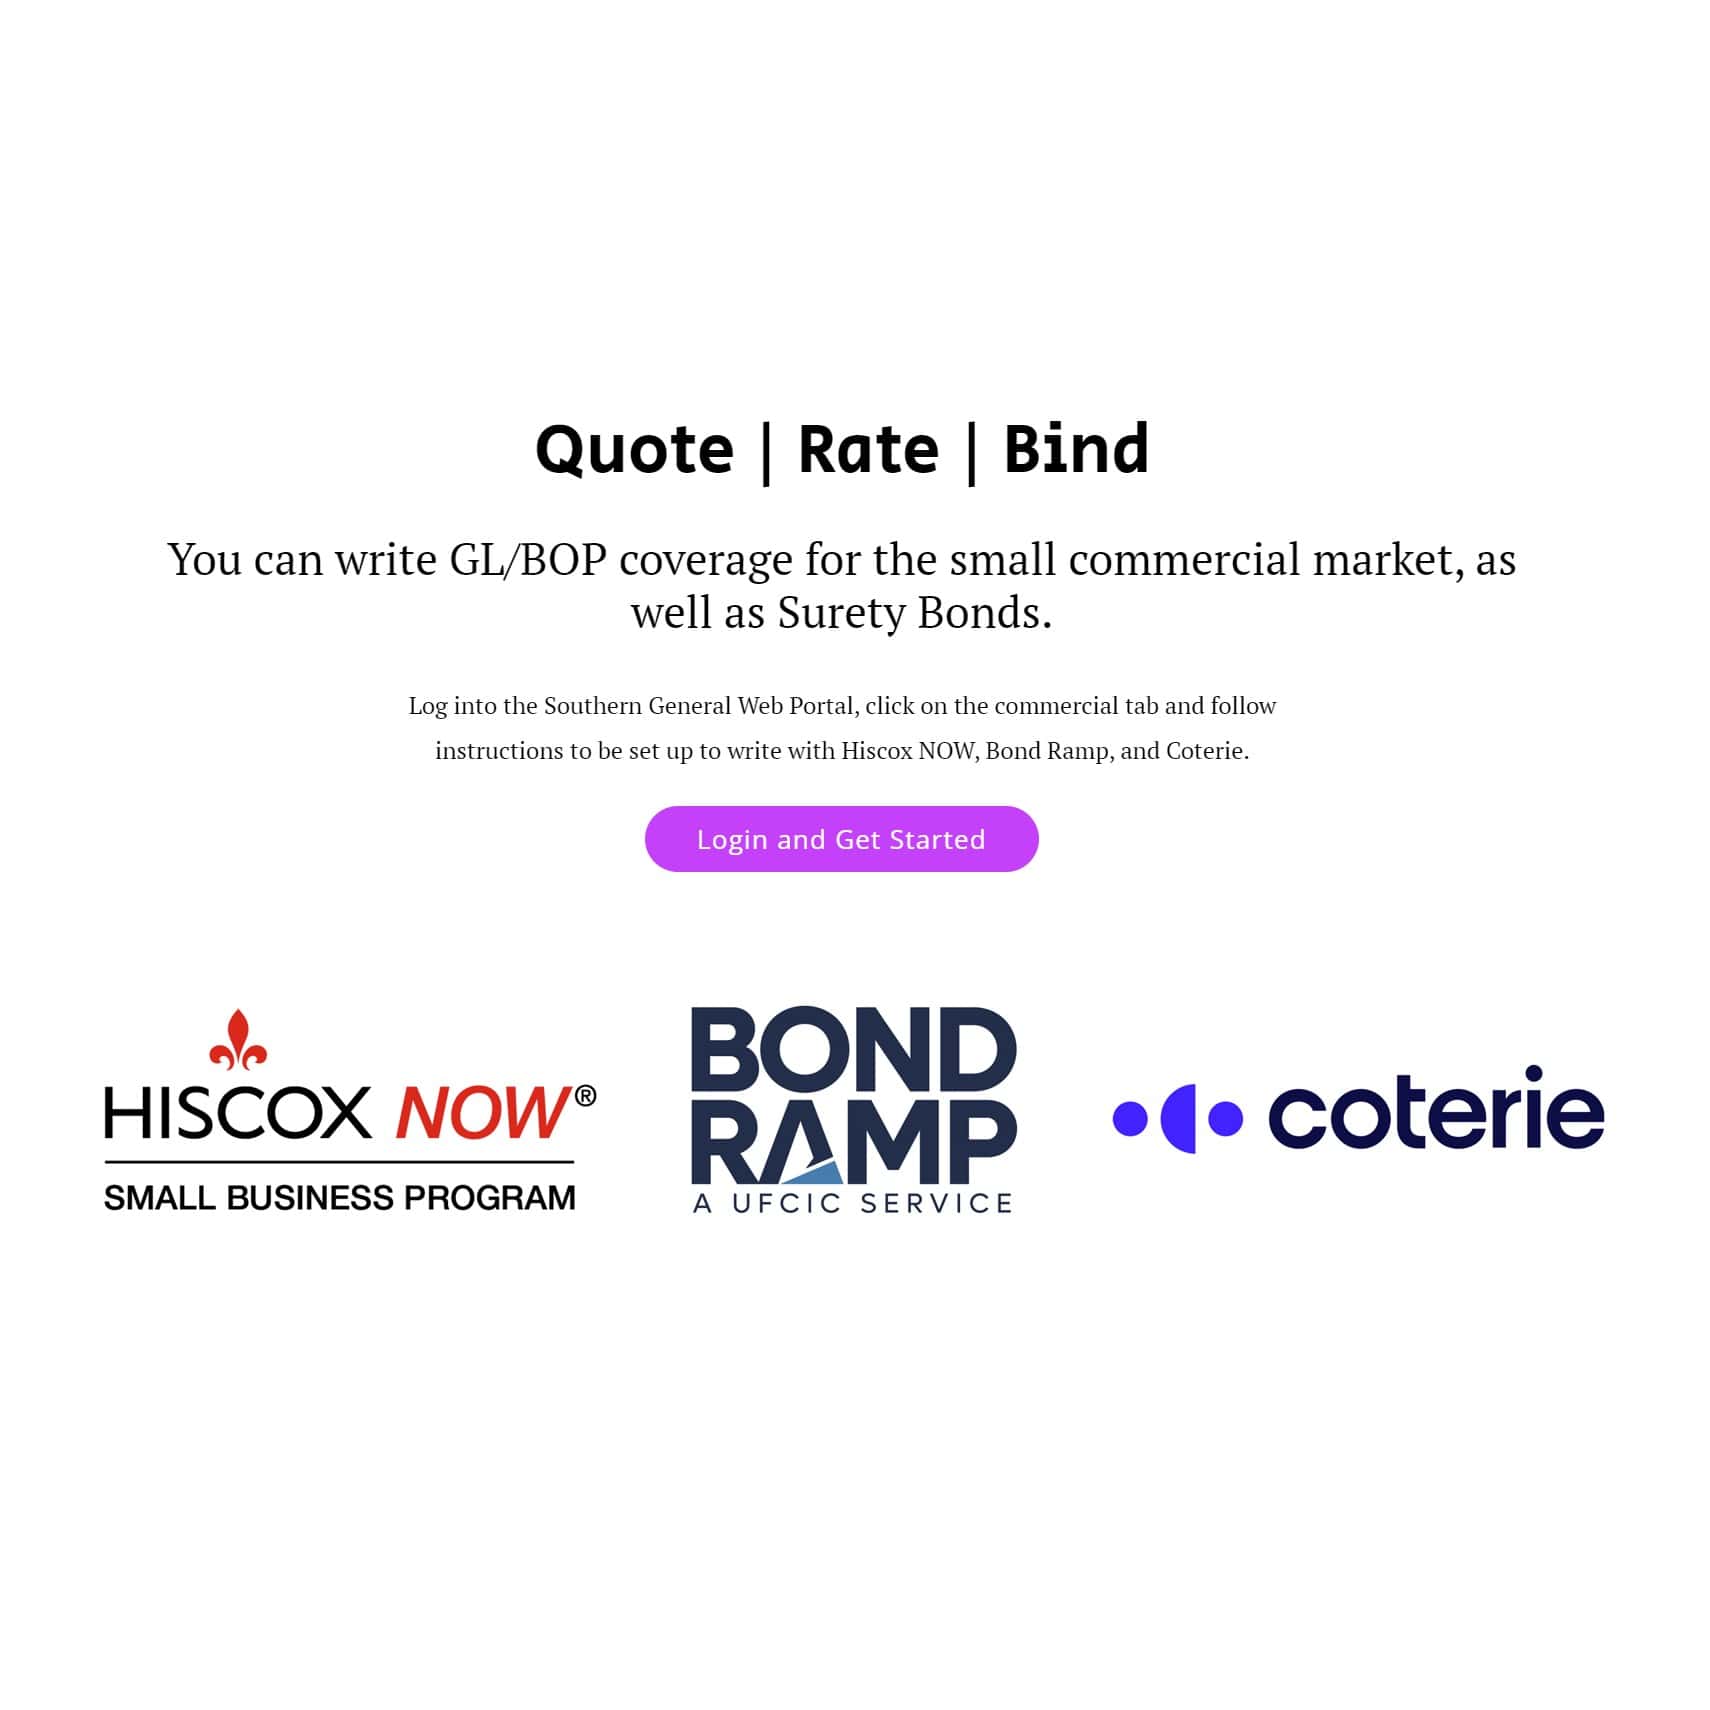 Featured image for “Quote, Rate, and Bind!”